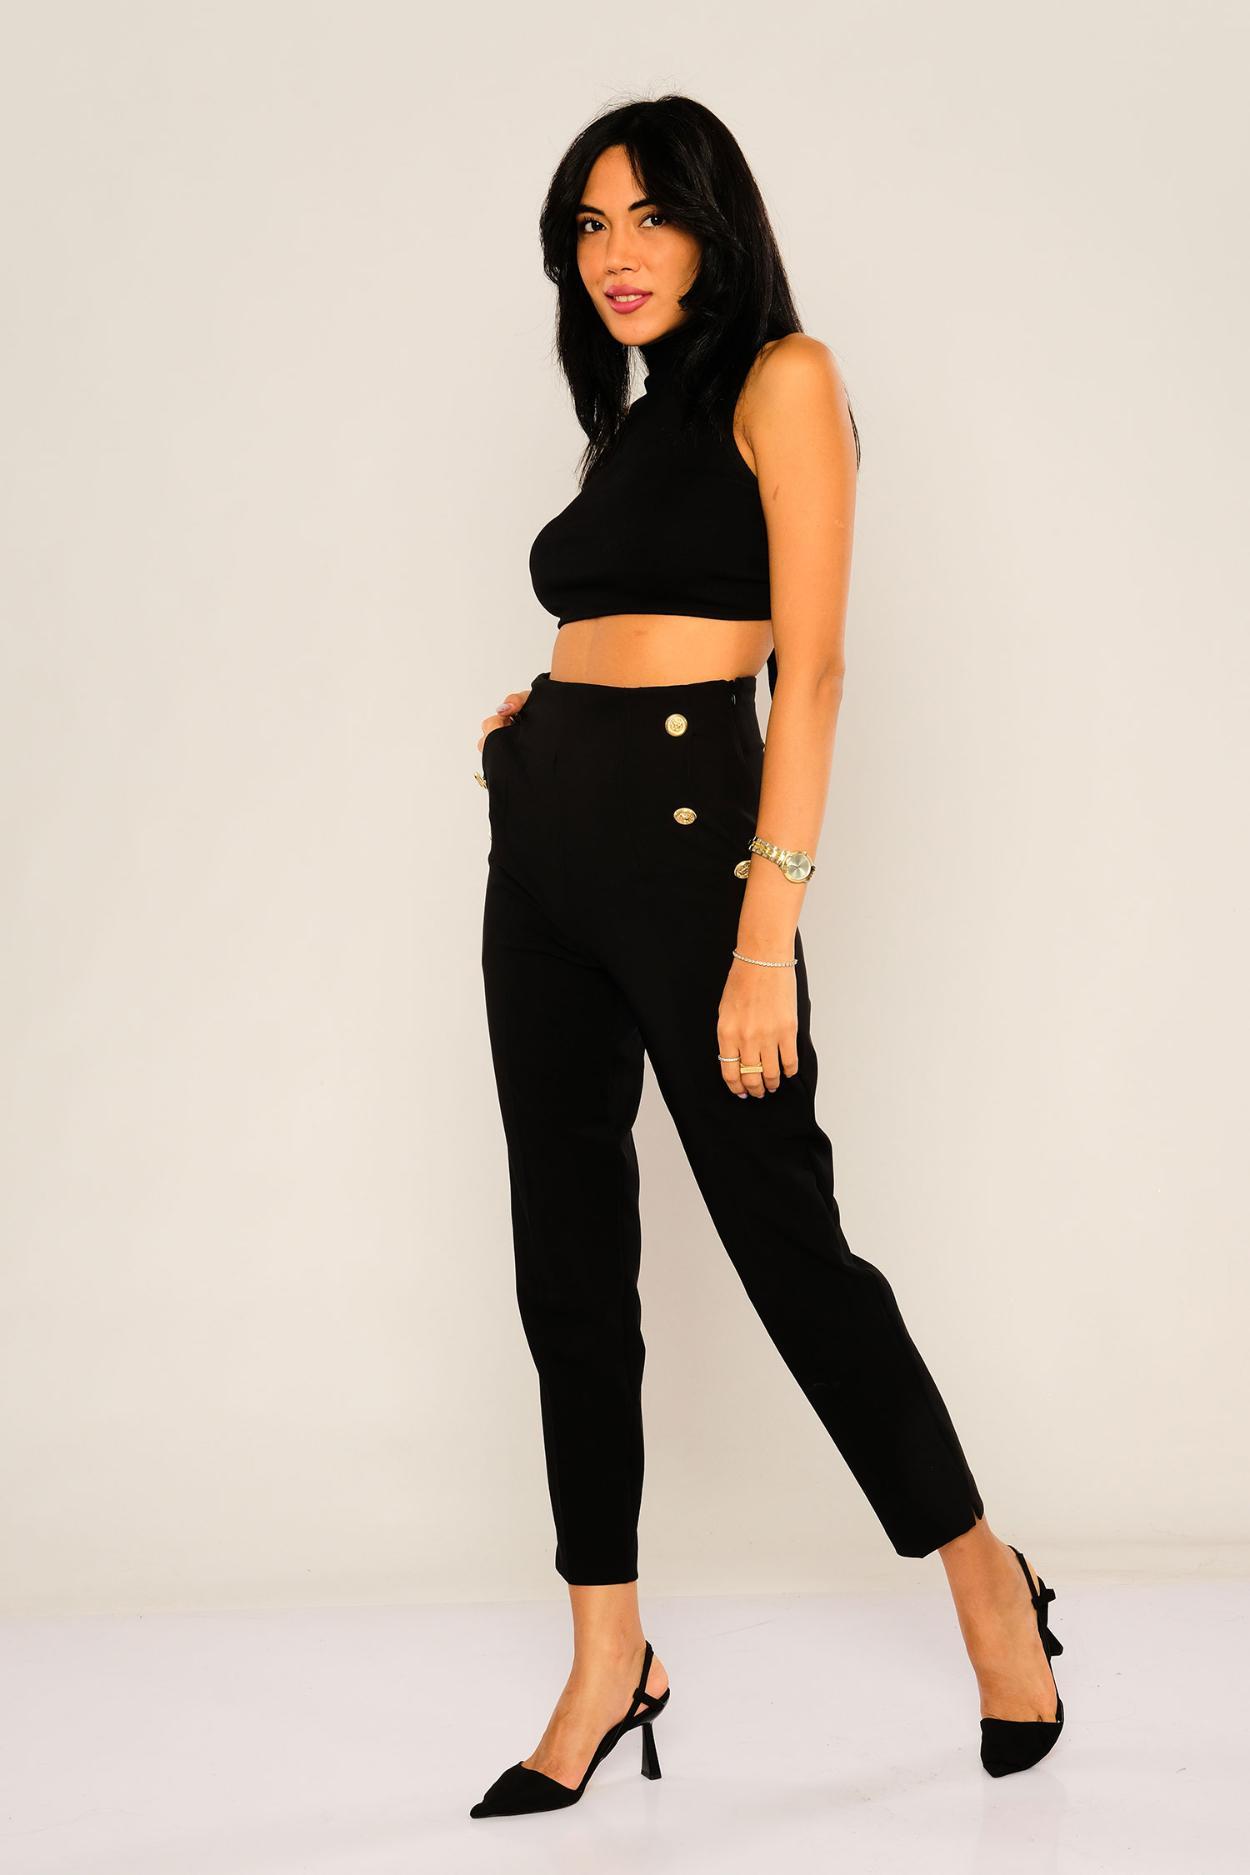 High Waisted Pants - Buy High Waisted Trousers Online for Women at